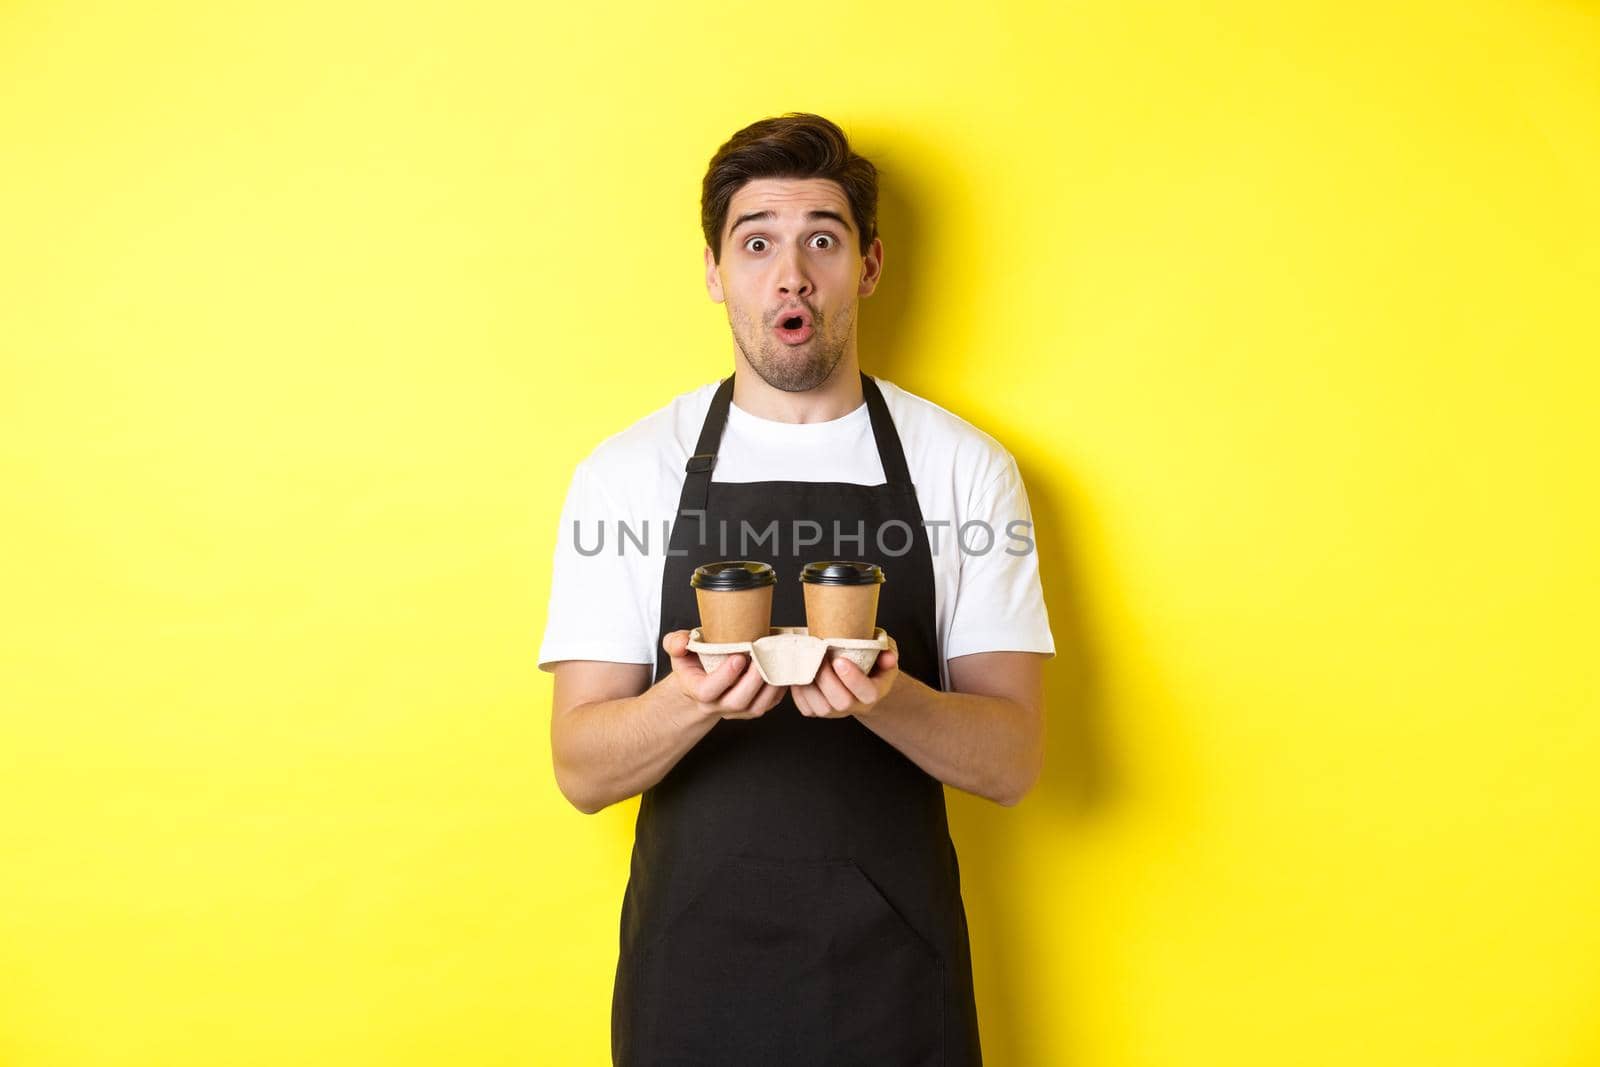 Barista serving coffee, looking surprised at camera, wearing black apron, standing against yellow background.